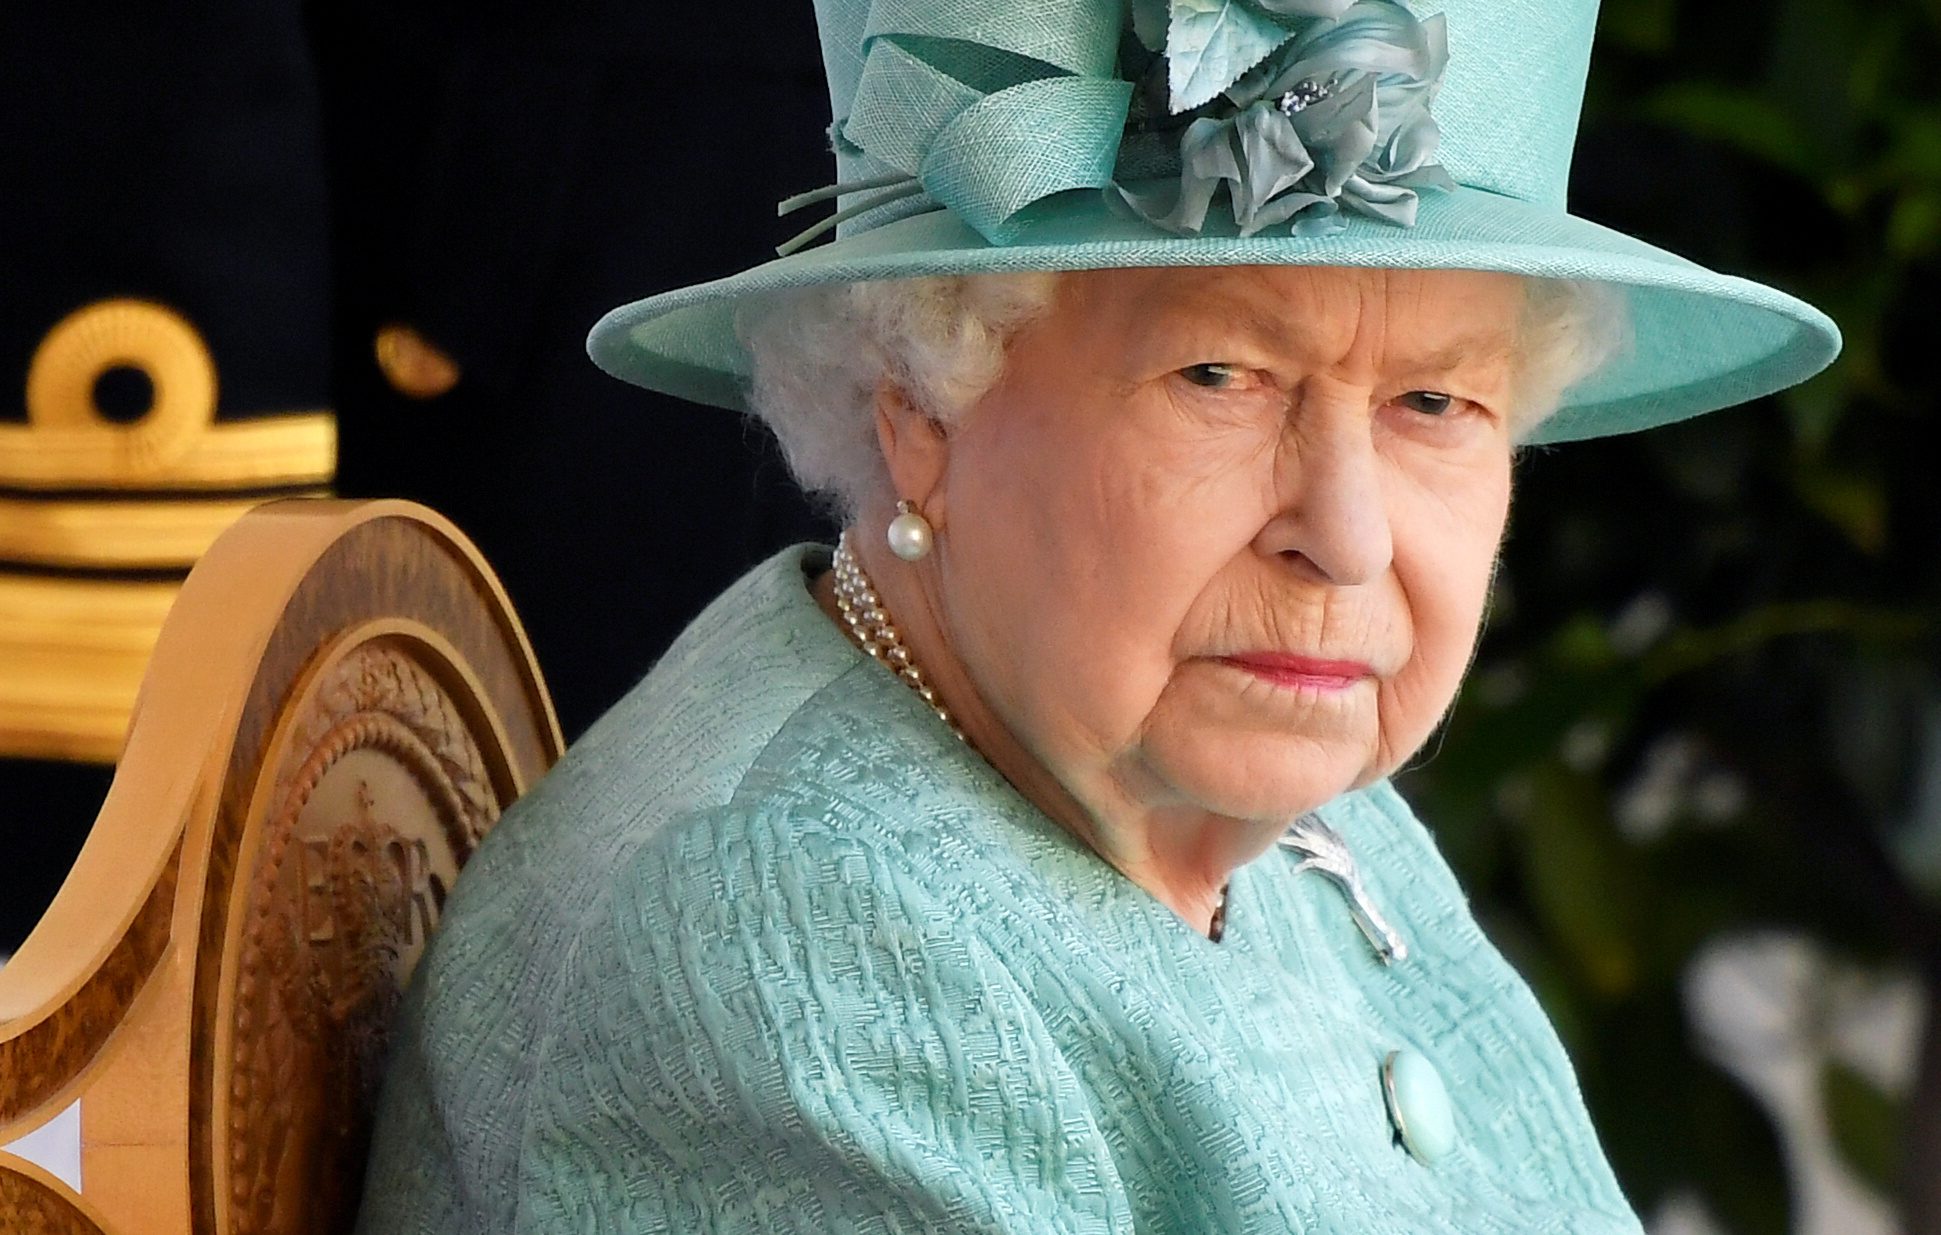 Eyes of the world will be on Scotland for climate summit, queen says